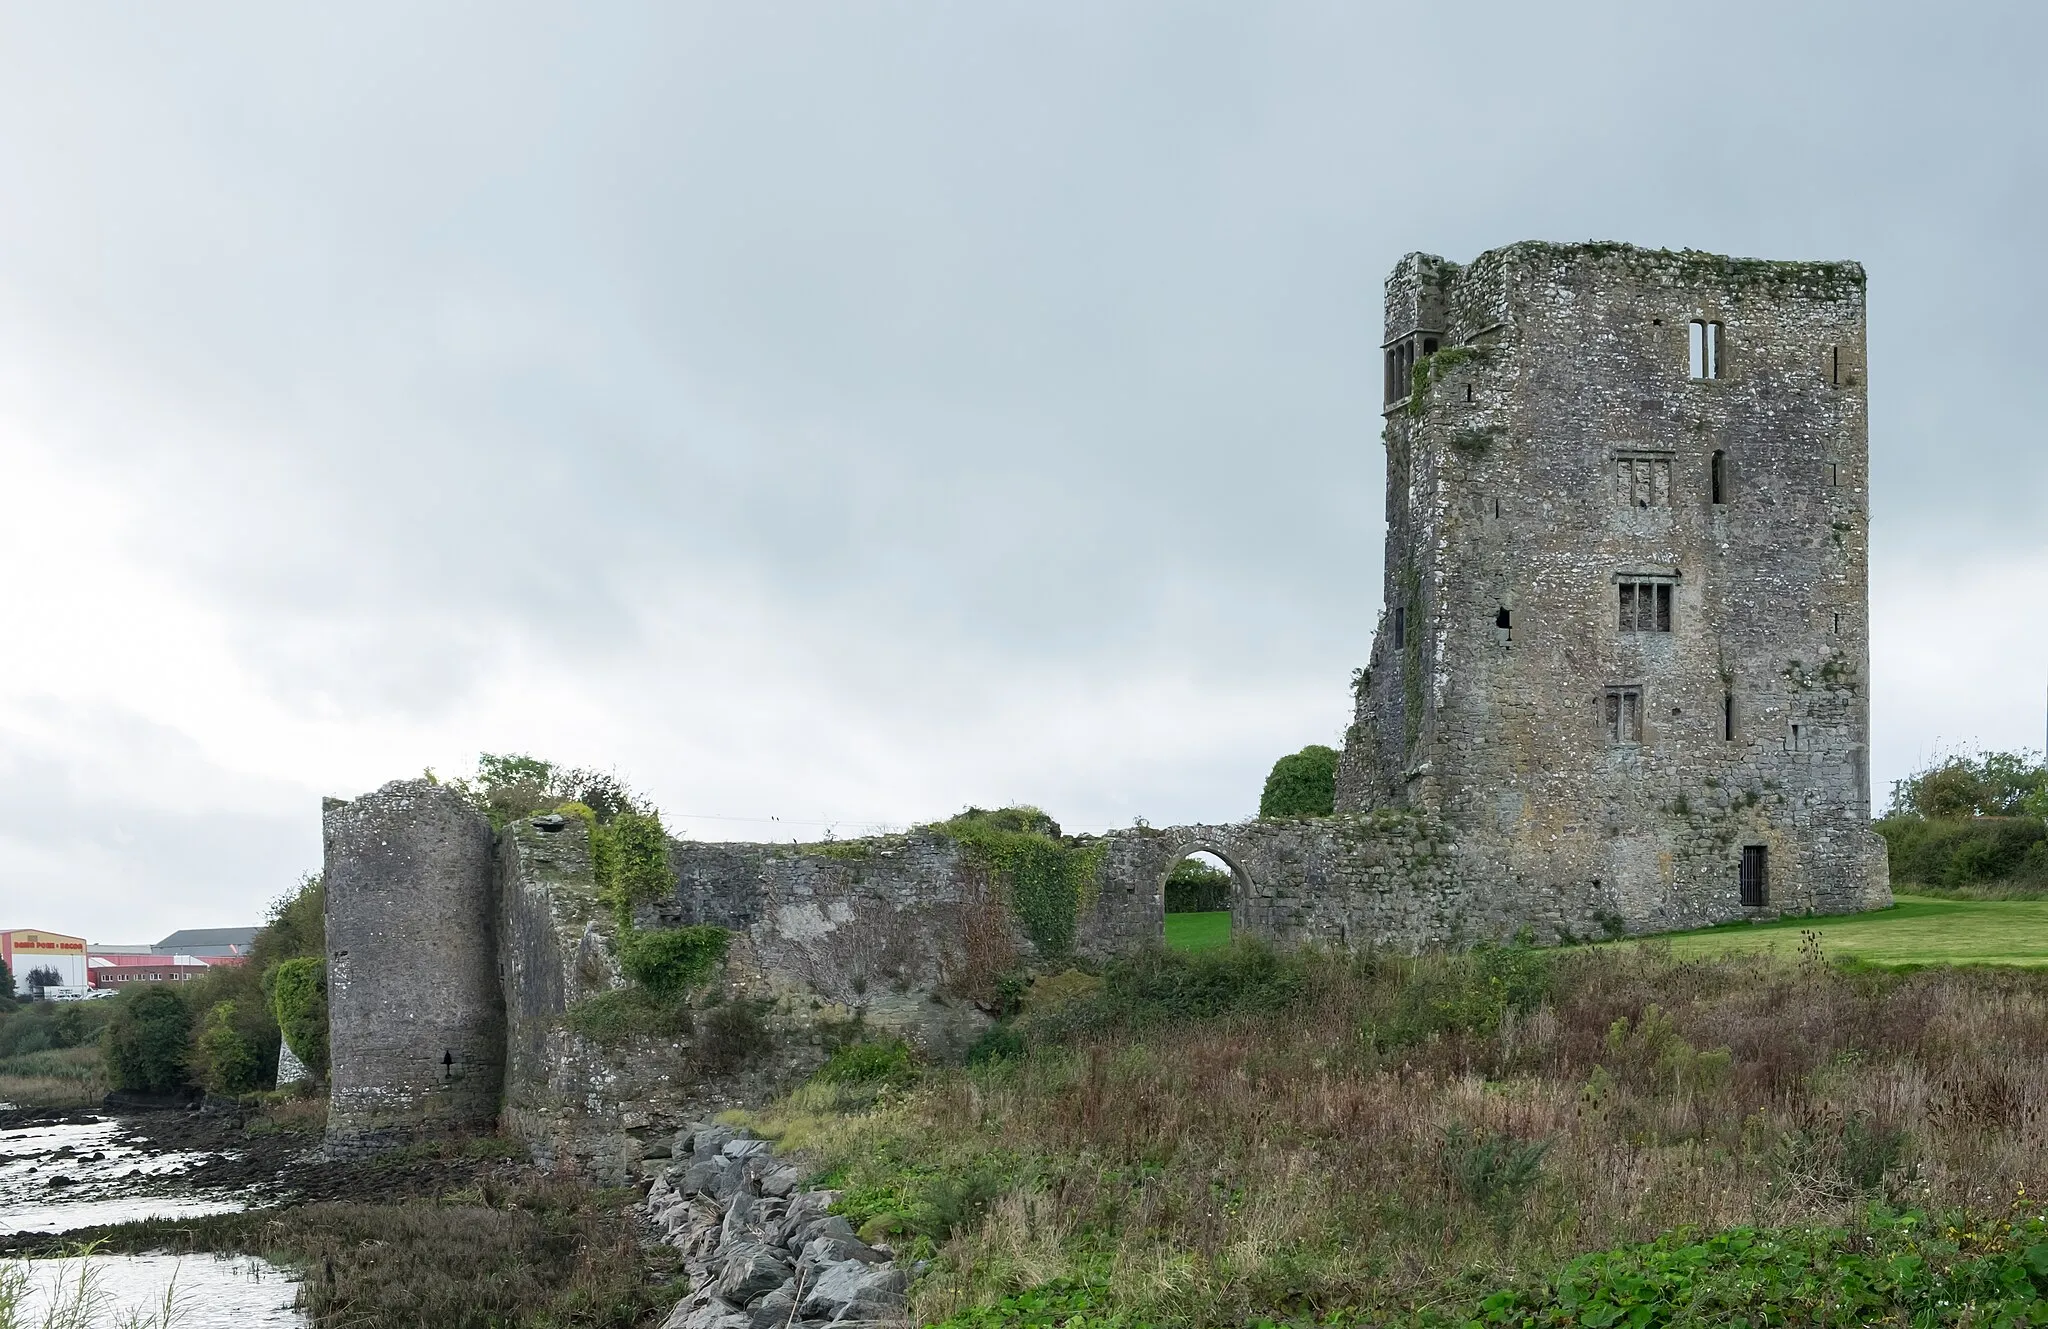 Photo showing: Granagh Castle, a 13th century castle near Waterford, Ireland.